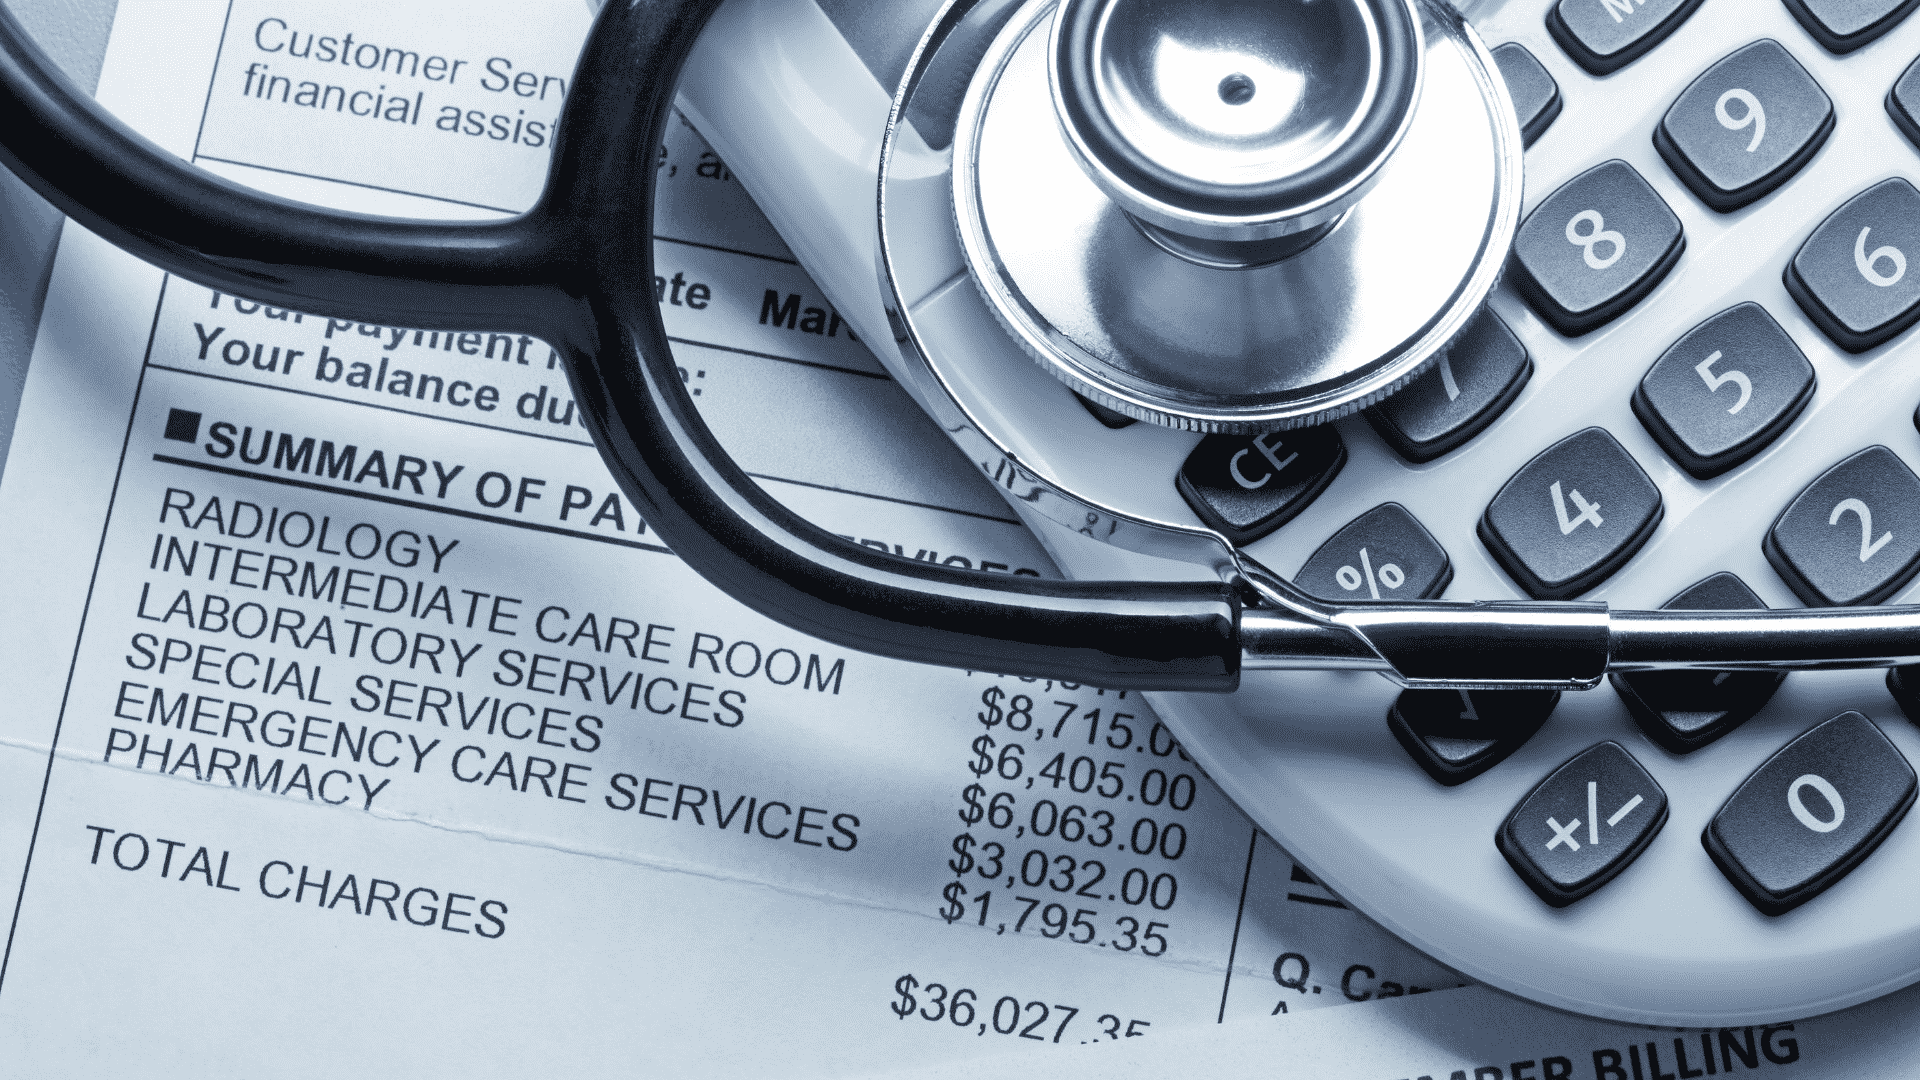 Medical Residents: Here’s Your Crash Course in Personal Finance & Tax